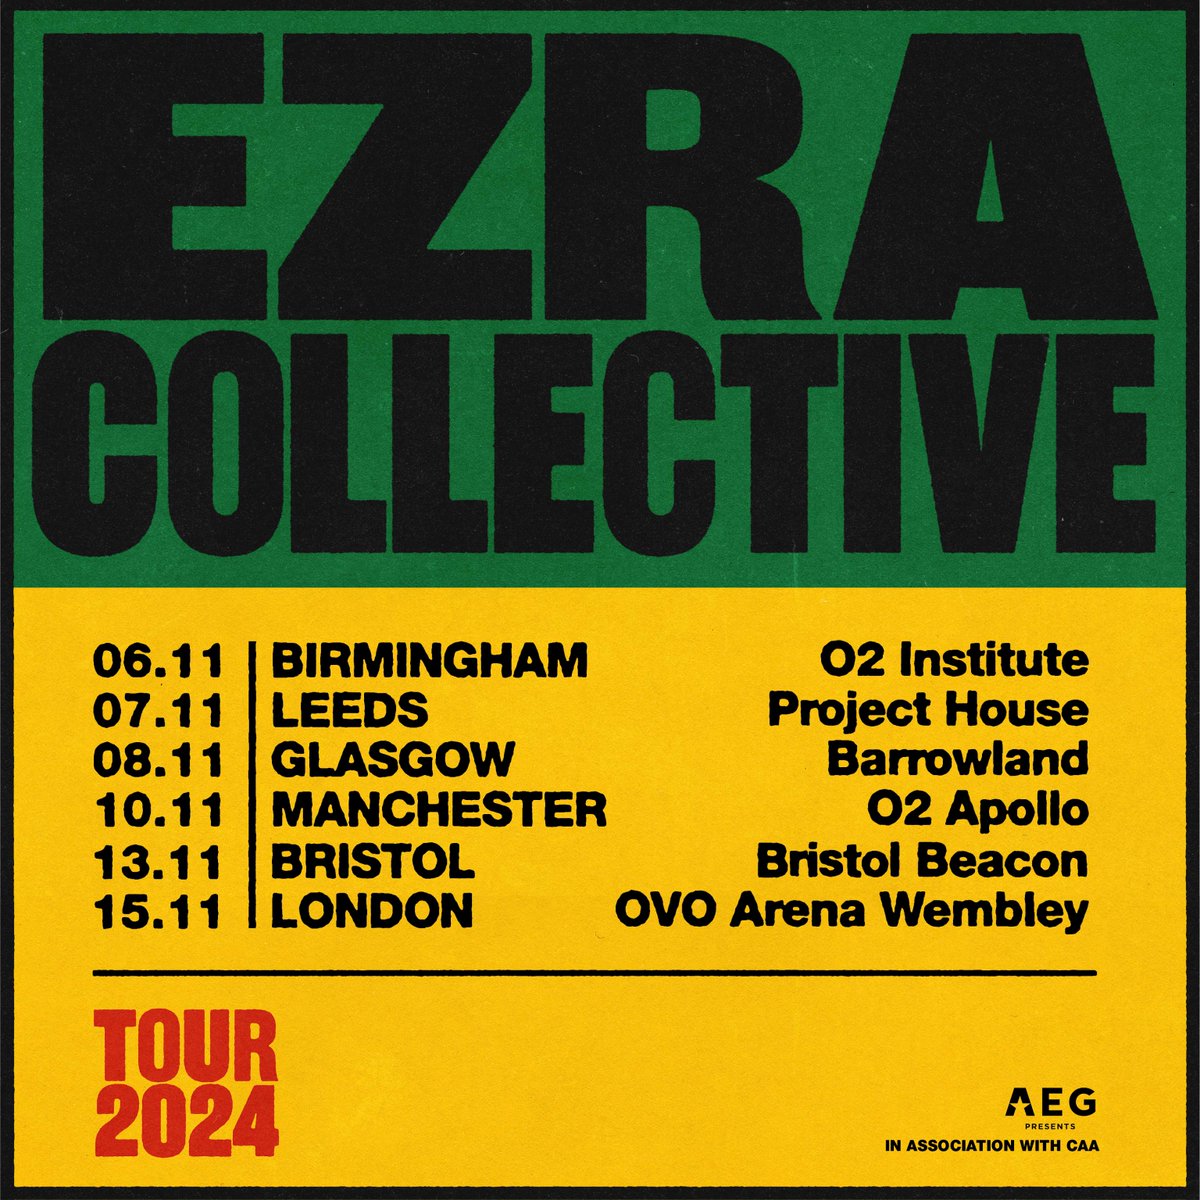 Tickets are on sale NOW for jazz outfit @EzraCollective, heading back out on the road with new music, joining us here on Sun 10 Nov 🔥 Grab yours 👉 ln-venues.com/KaLC50Rtyux